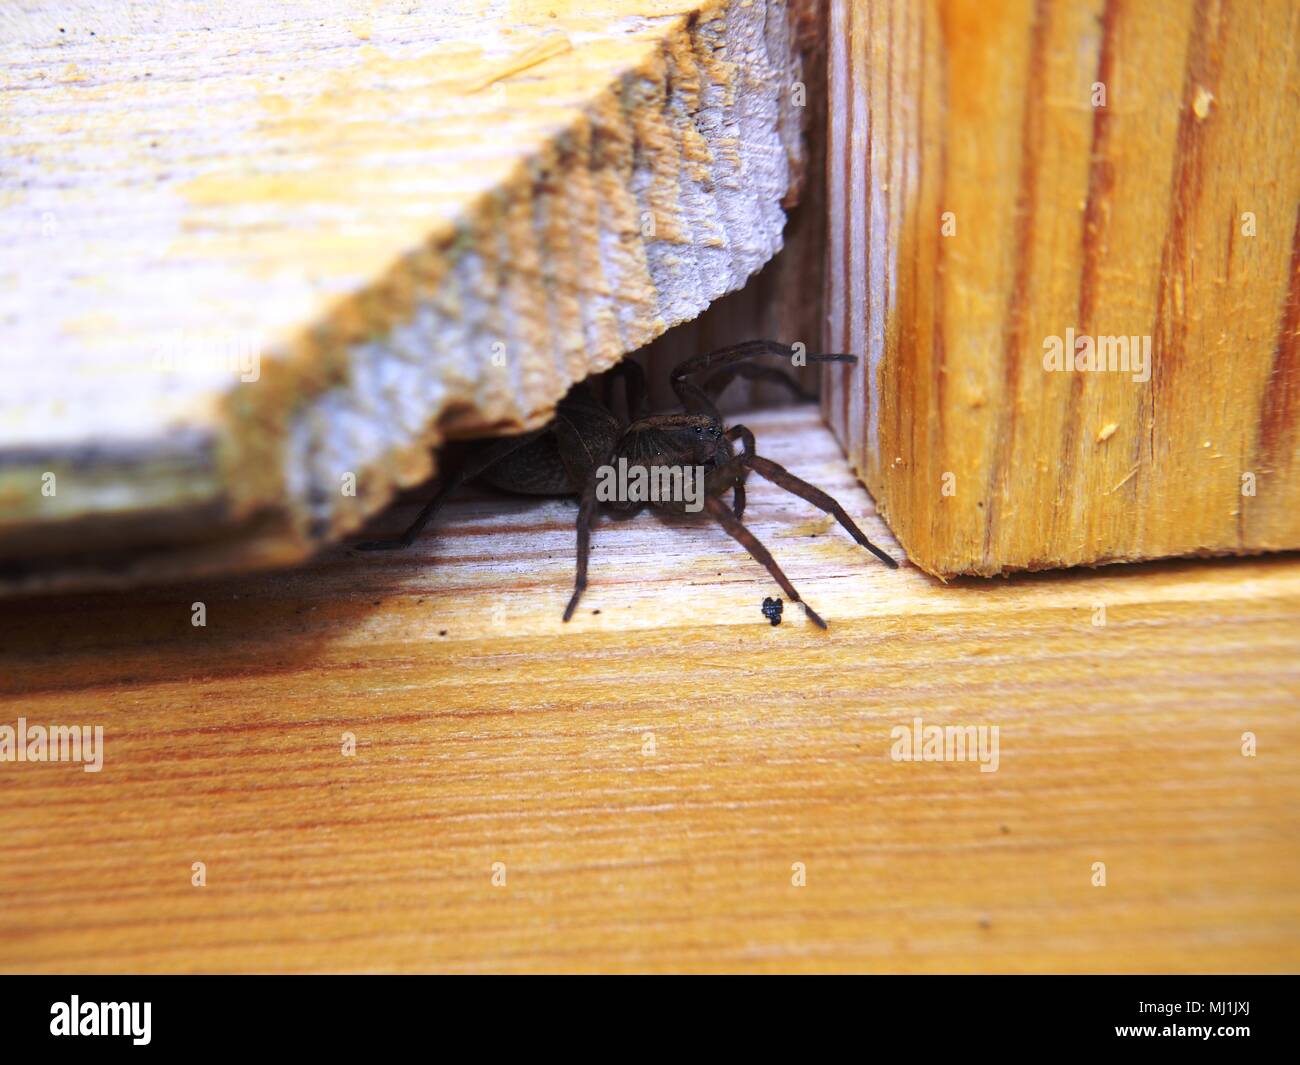 Black spider sits on a wooden surface. Arthropod. Macro mode. Stock Photo